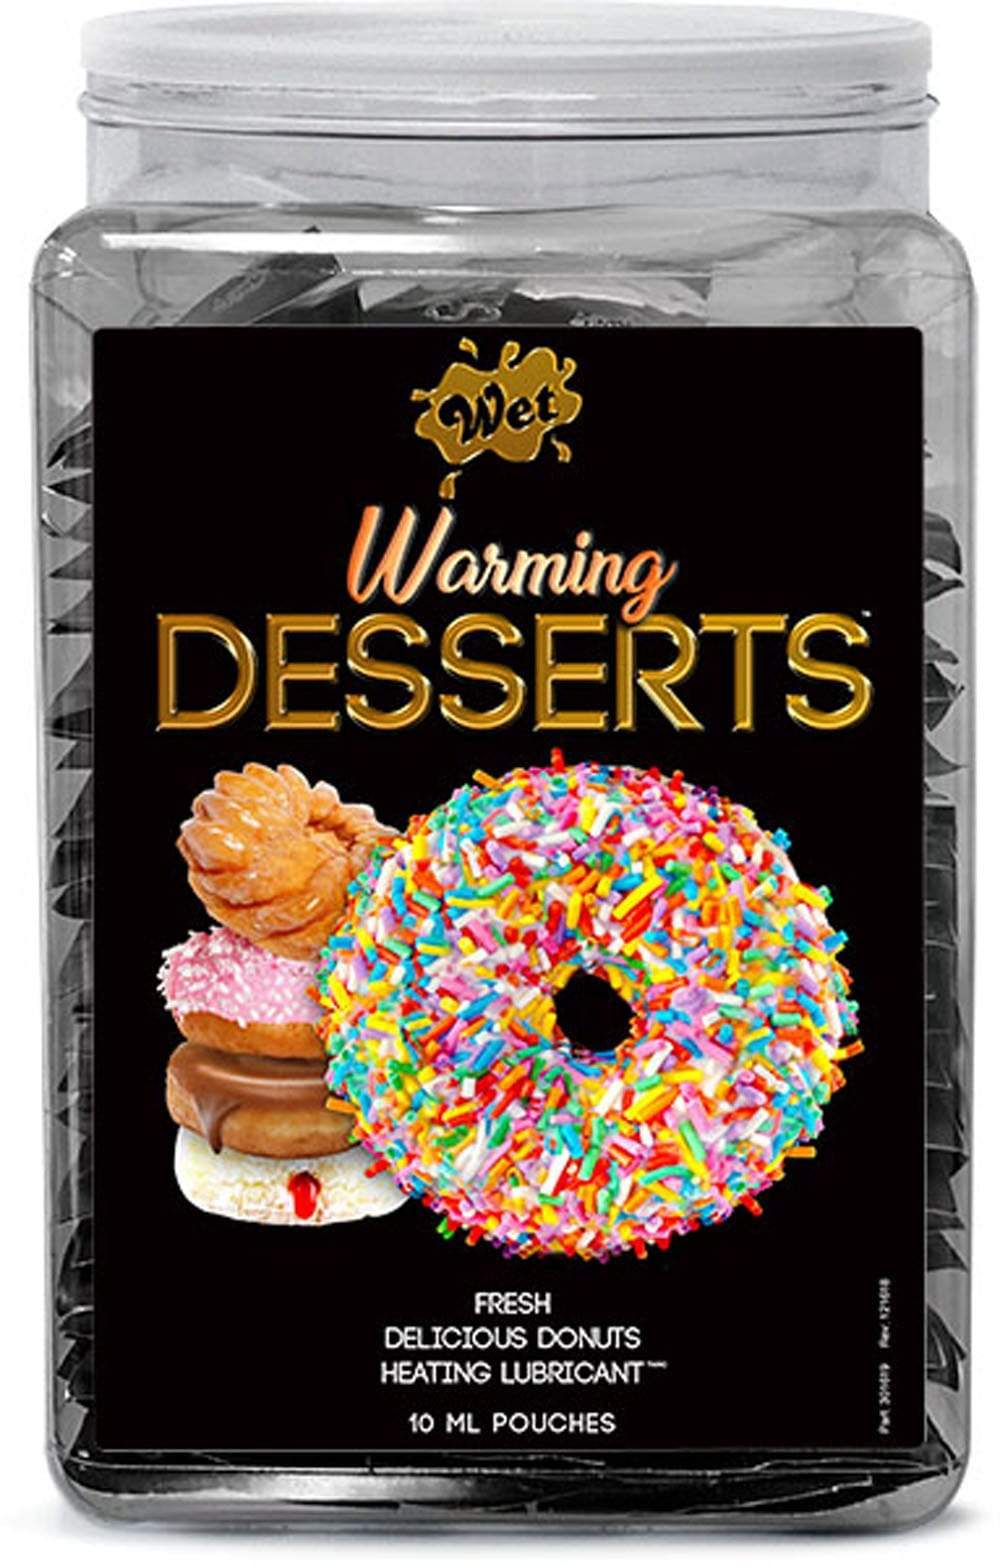 wet warming desserts fresh delicious donuts 10ml pouch counter bowl 144pc display